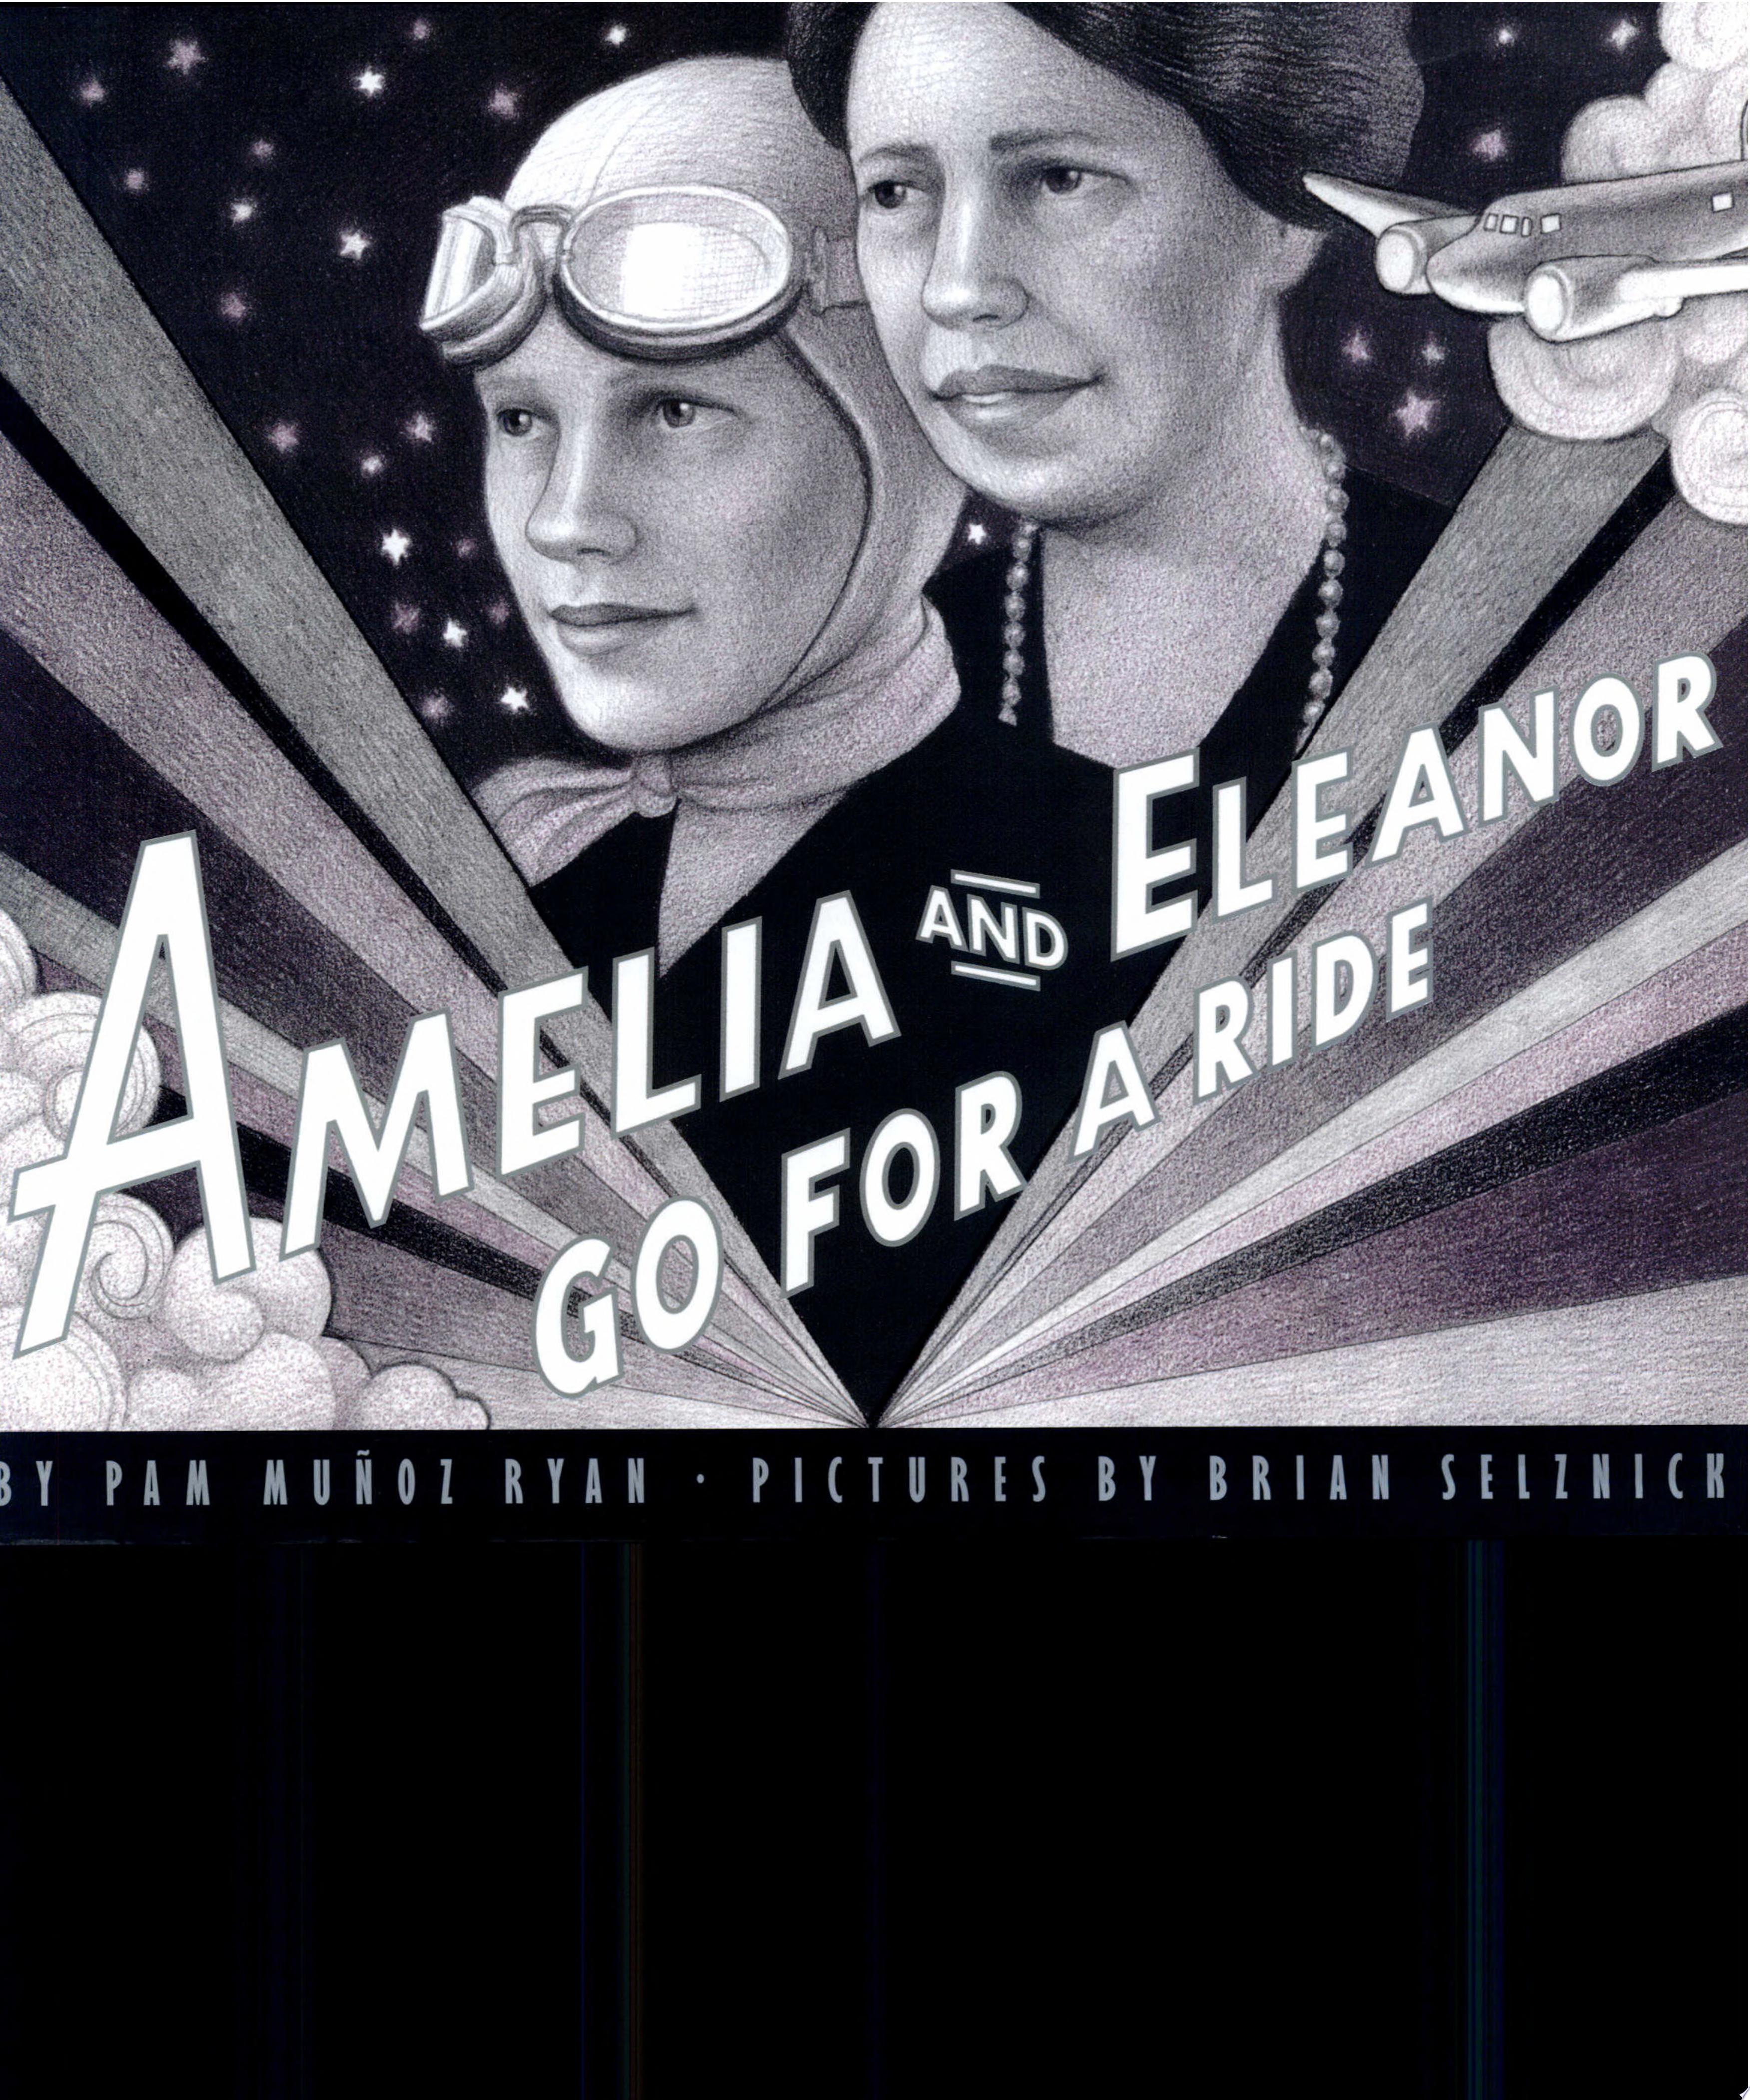 Image for "Amelia and Eleanor Go for a Ride"